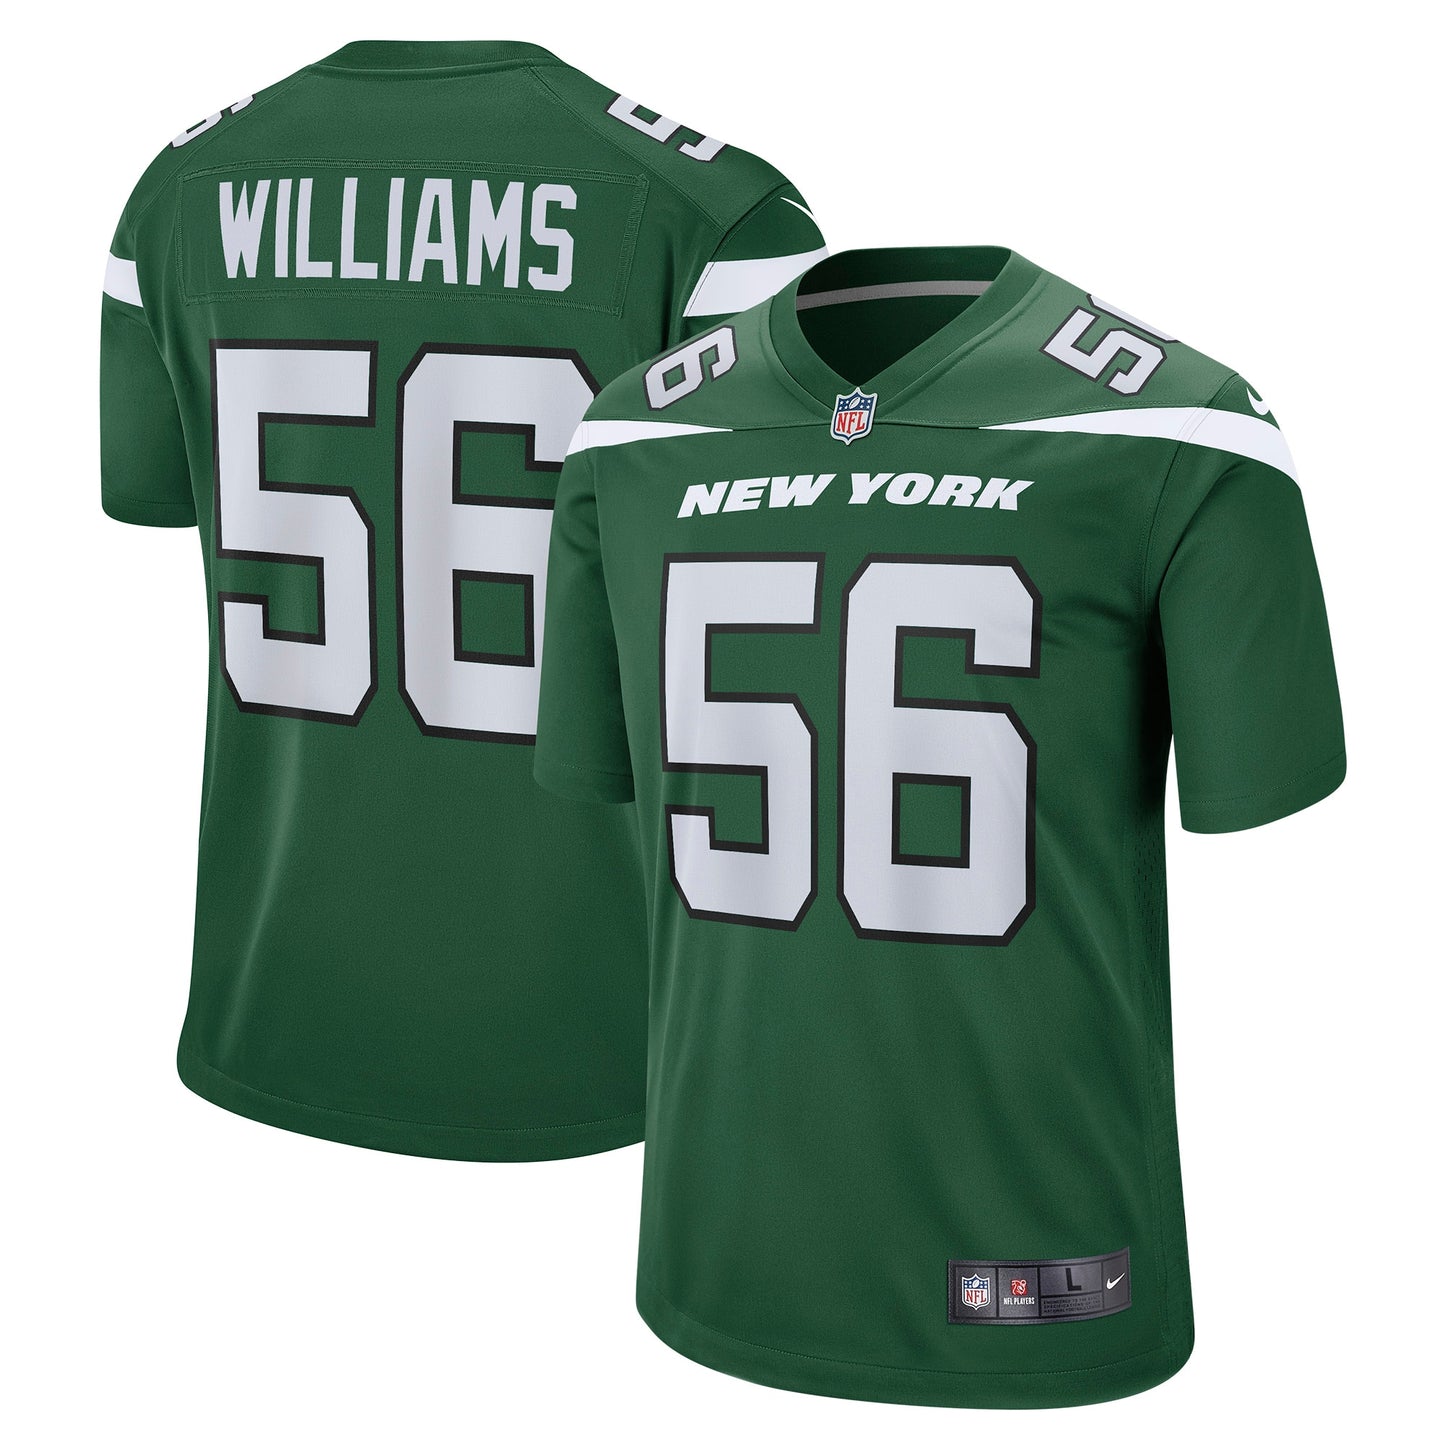 Quincy Williams New York Jets Nike Game Jersey - Gotham Green